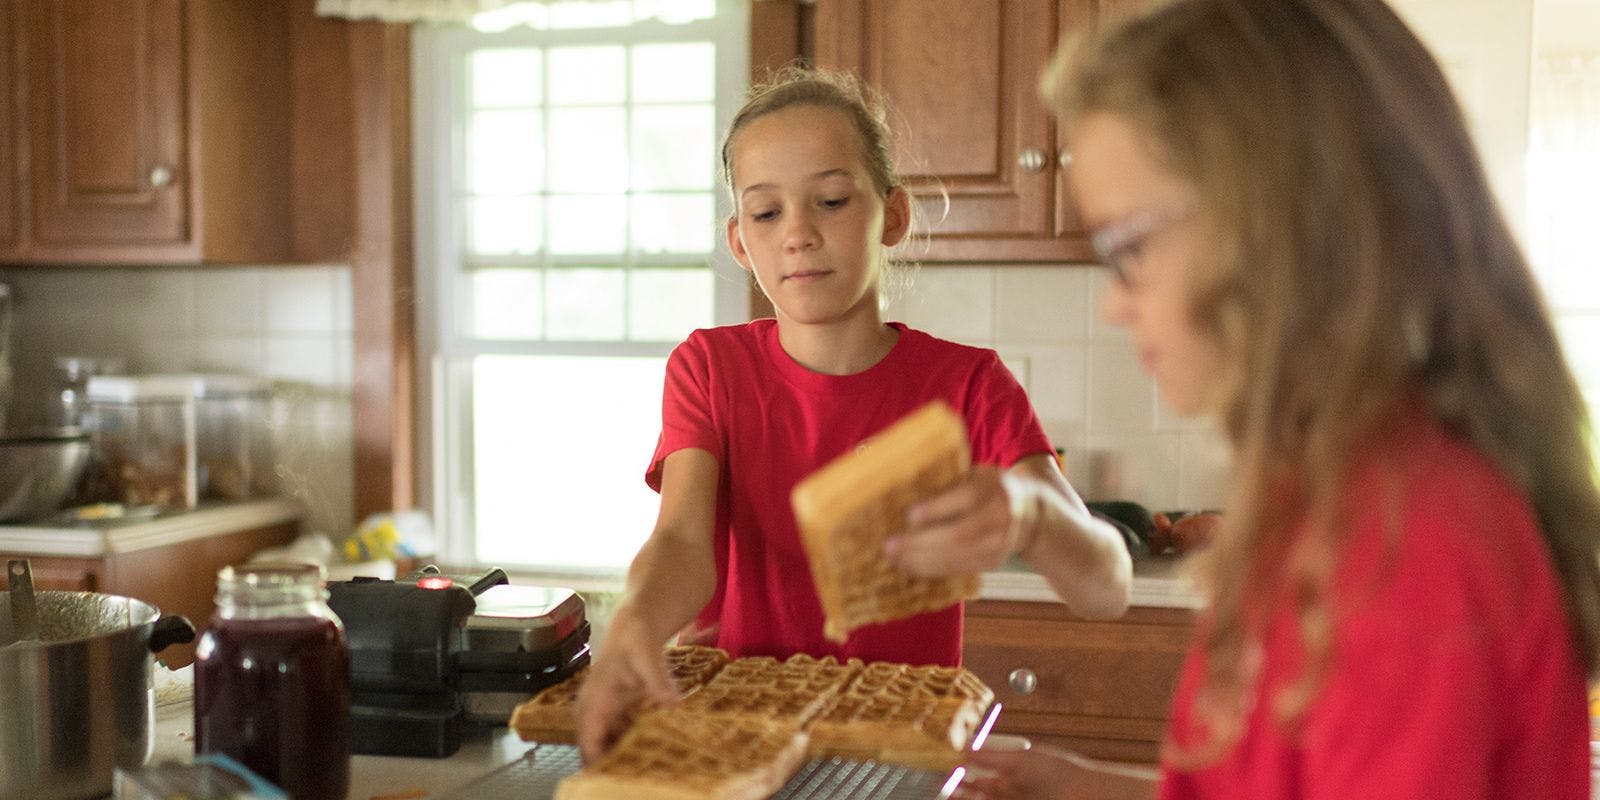 Two young girls prepare waffles in the kitchen.